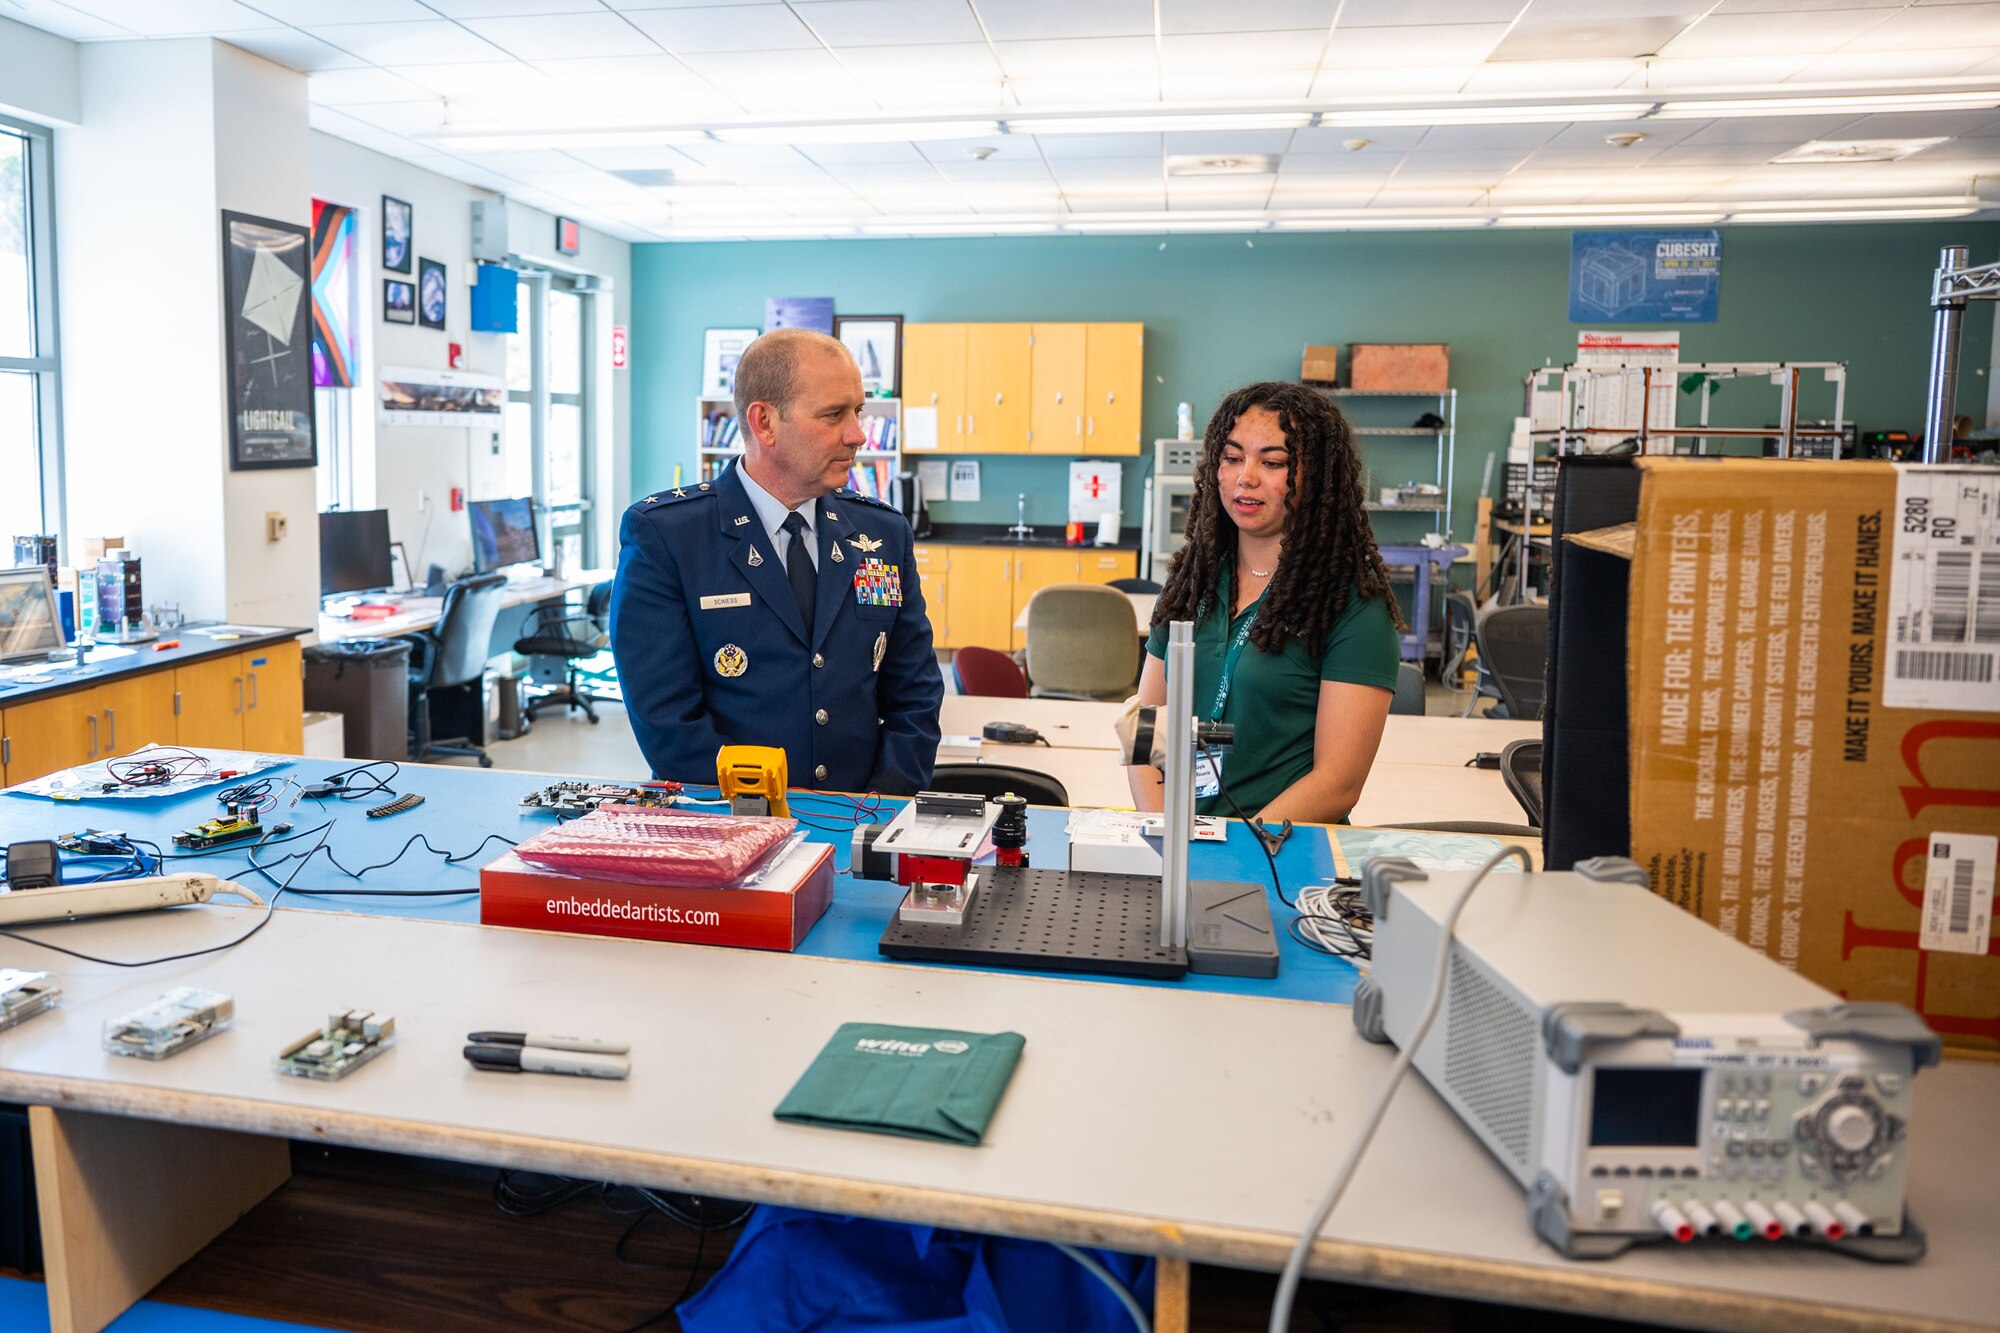 U.S. Space Force Maj. Gen. Douglas A. Schiess, Combined Force Space Component Command commander, left, and Kayla Del Rosario, California Polytechnic State University mechanical engineer student, discuss current and future projects of the Cal Poly CubeSat Laboratory at California Polytechnic State University in San Luis Obispo, Calif., April 25, 2023. The Cal Poly CubeSat Laboratory is part of PolySat, a student-run, multidisciplinary independent research lab at the university which partnered with Vandenberg through a Cooperative Research and Development Agreement (CRADA) in 2019, the first of its kind between the base and an academic institution. A CRADA is a no-cost collaboration that enables the transfer and exchange of technology and professional expertise. (U.S. Space Force photo by Tech. Sgt. Luke Kitterman)